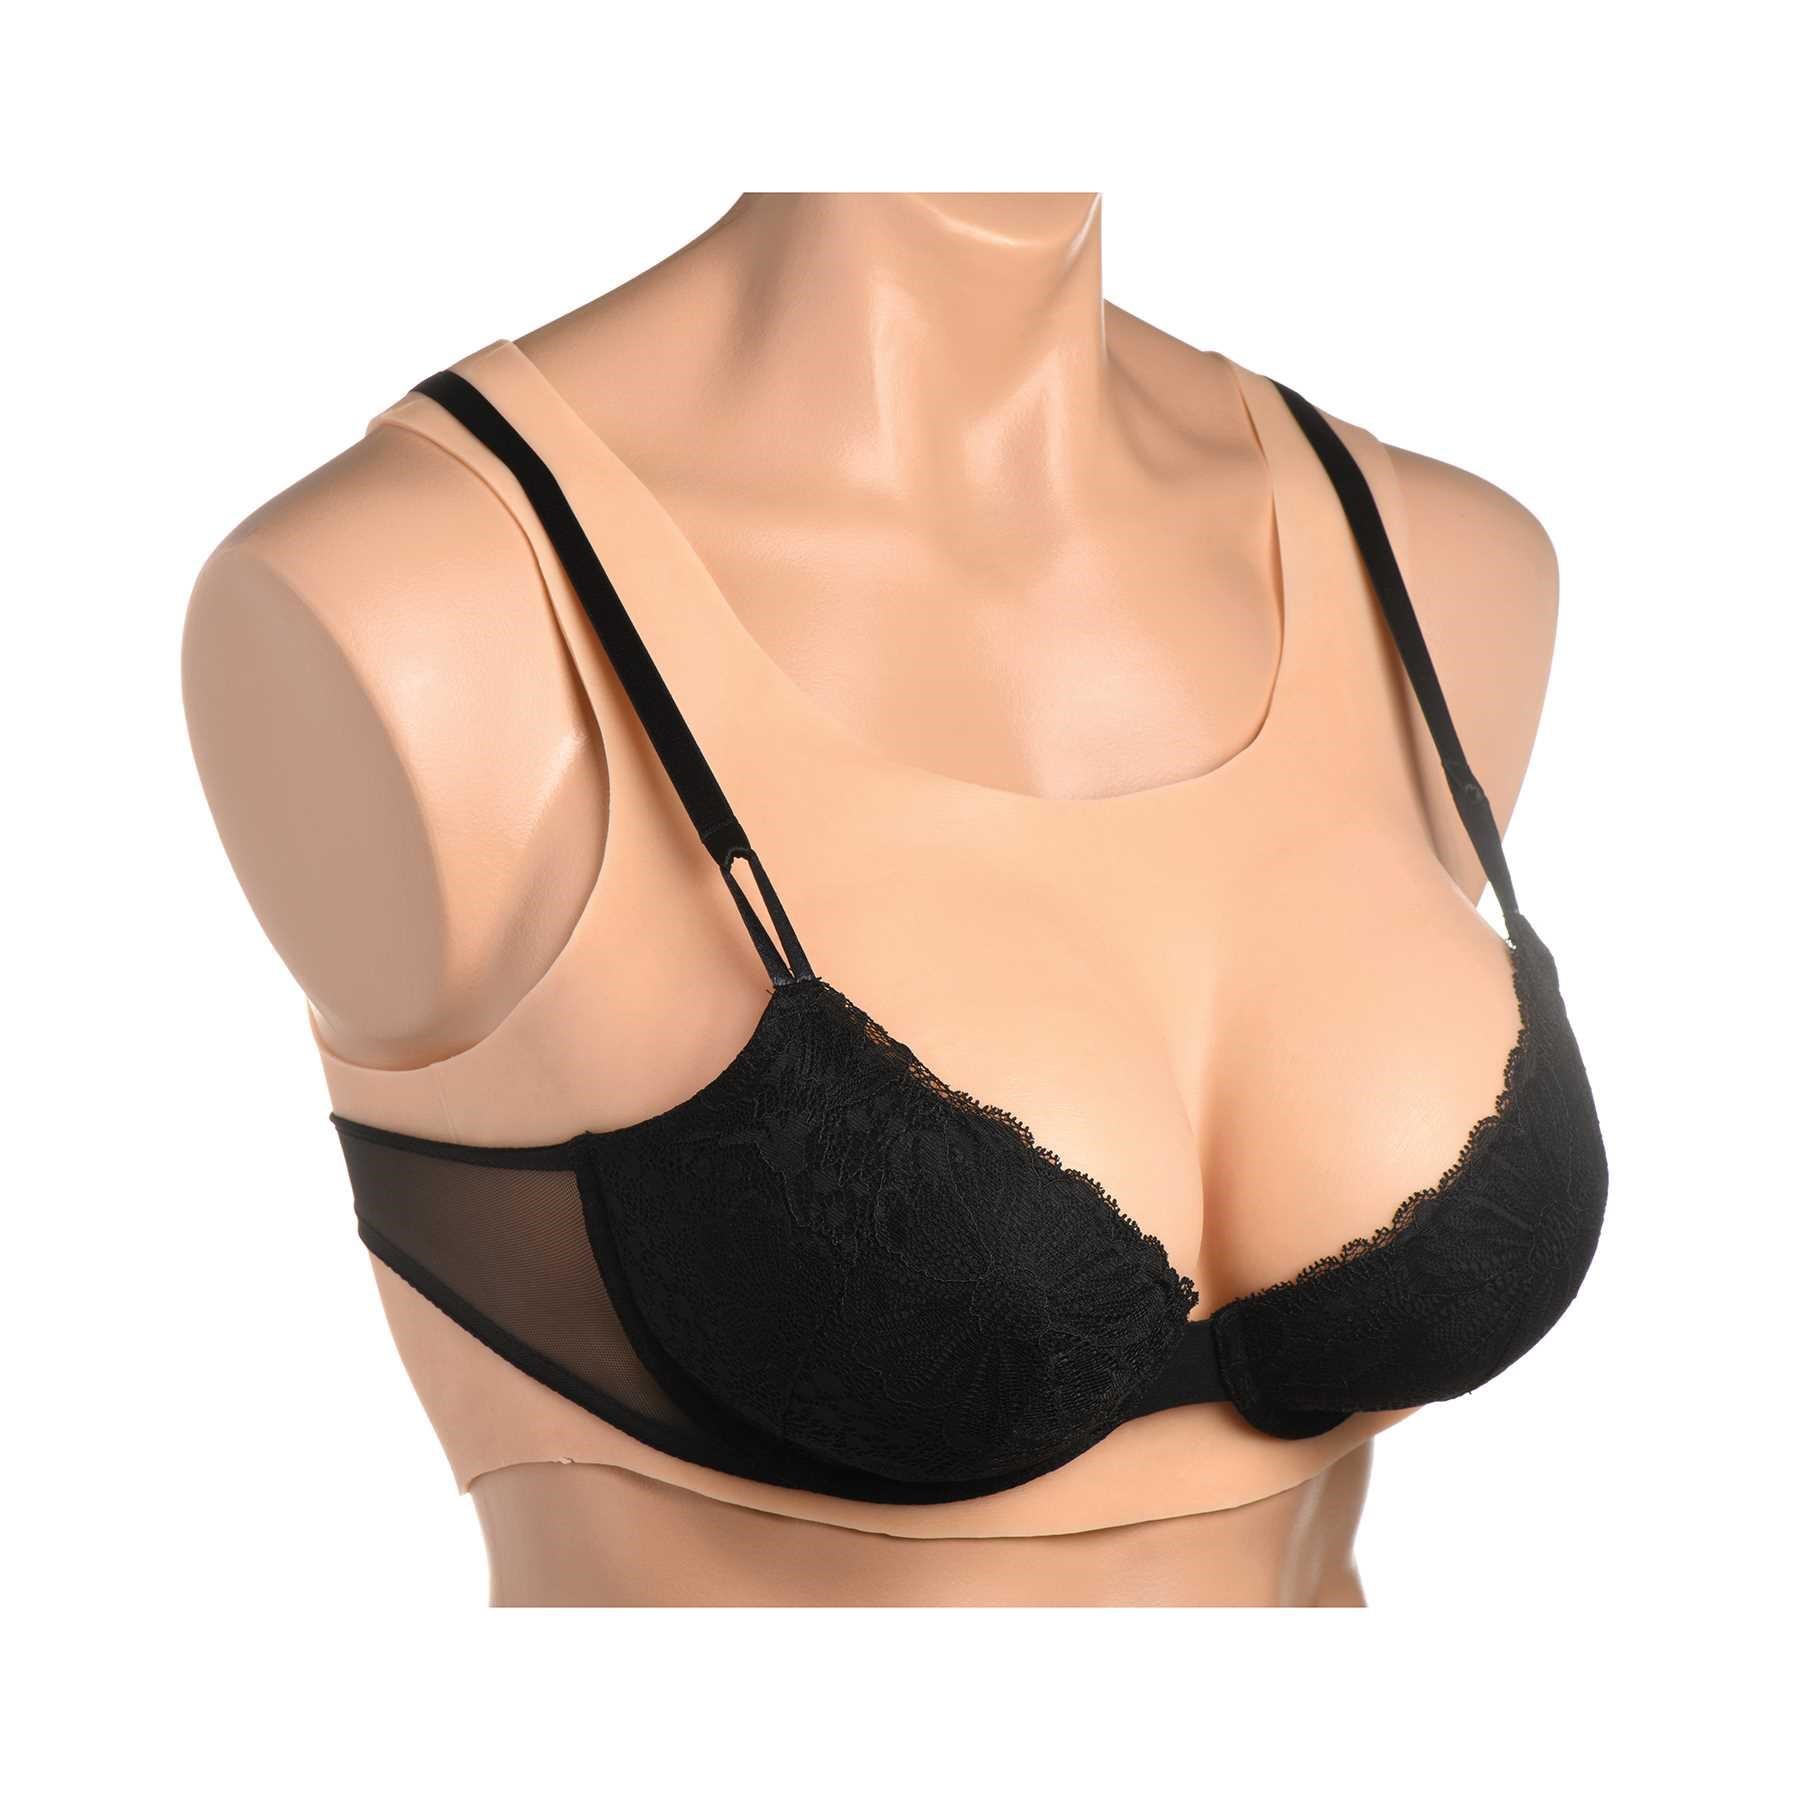 Perky Pair D-Cup Silicone Breasts with bra